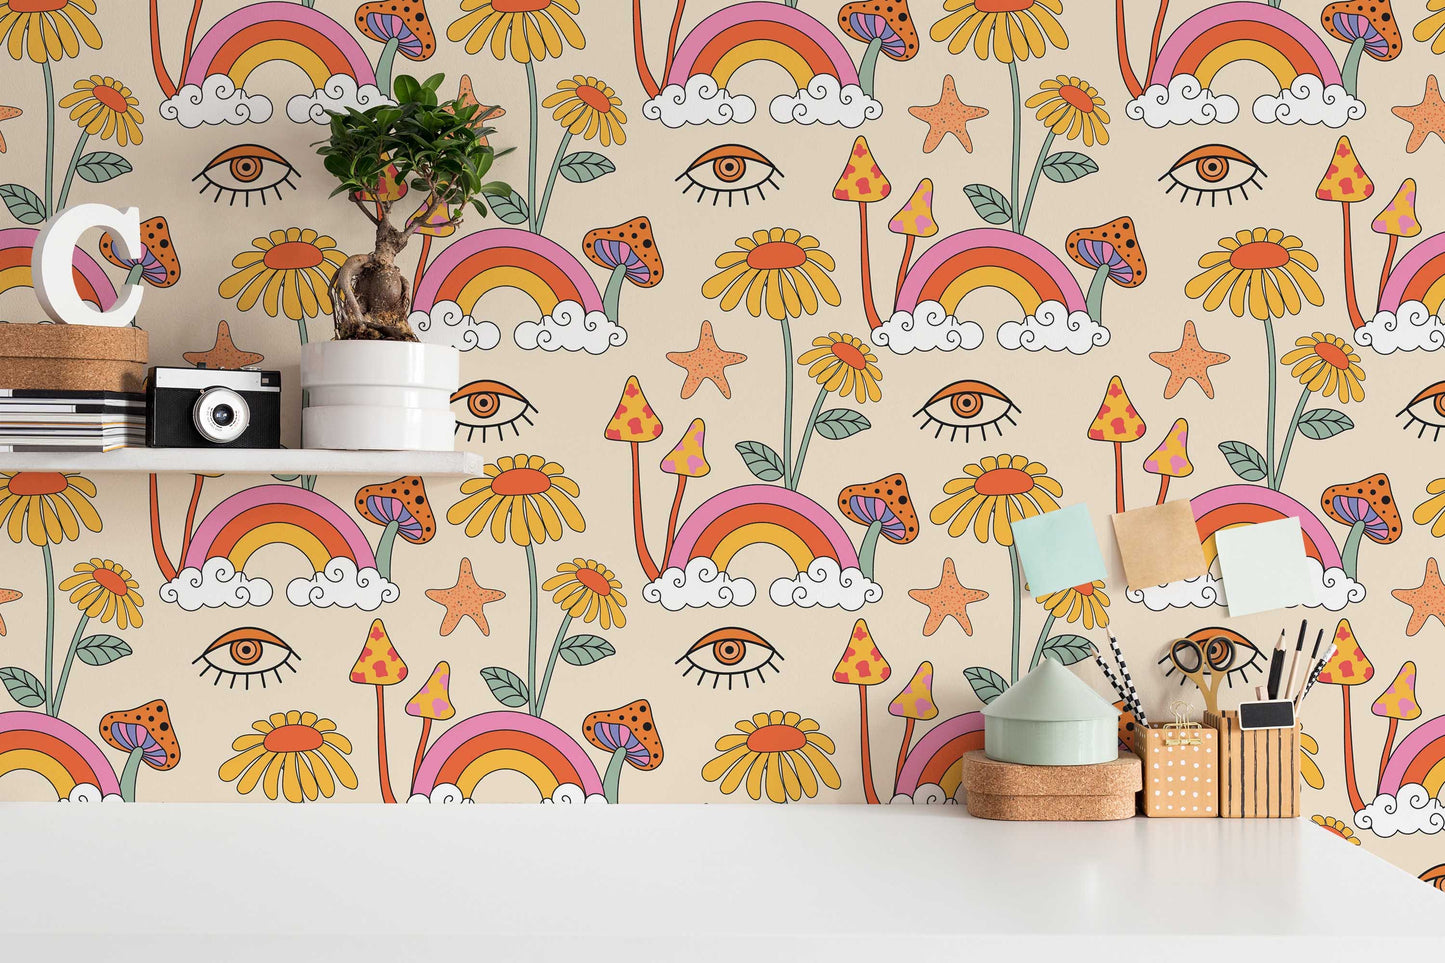 Psychedelic Mushroom Peel-and-Stick or Traditional Wallpaper for yourHome, Camper van, or Vintage Trailer,